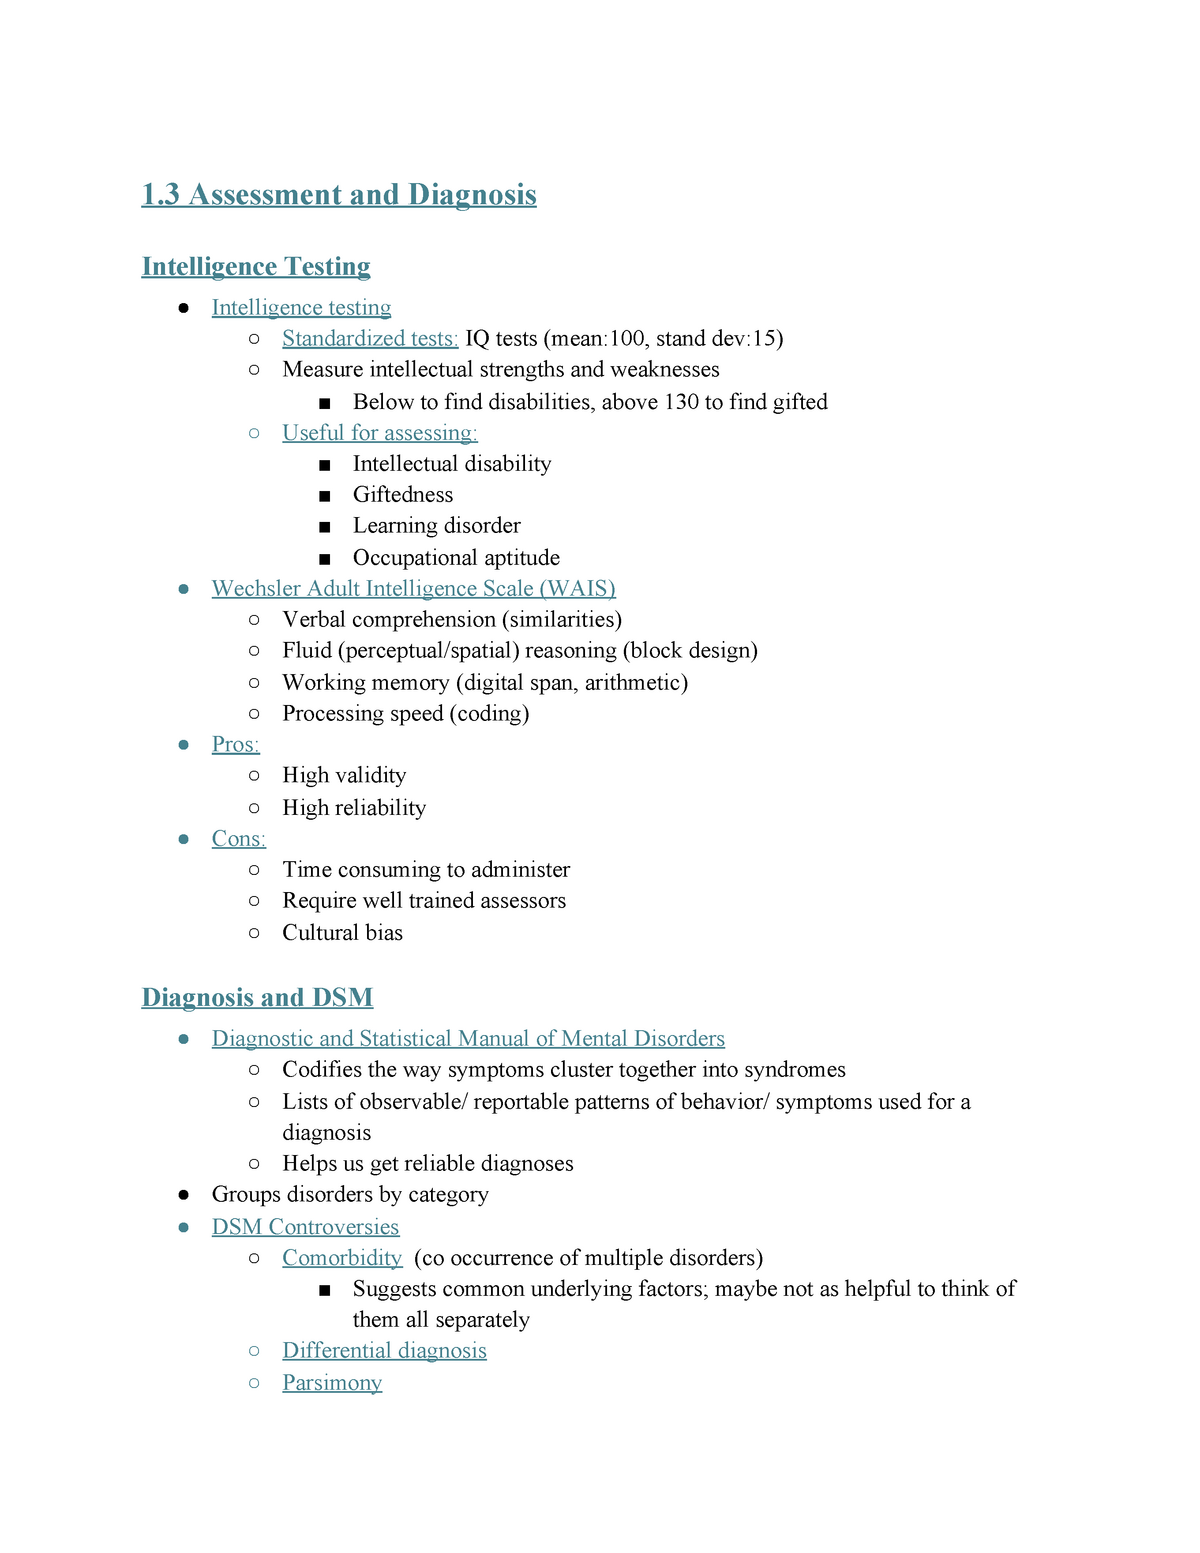 CLP EXAM 2 Exam 2 notes 1 Assessment and Diagnosis Intelligence